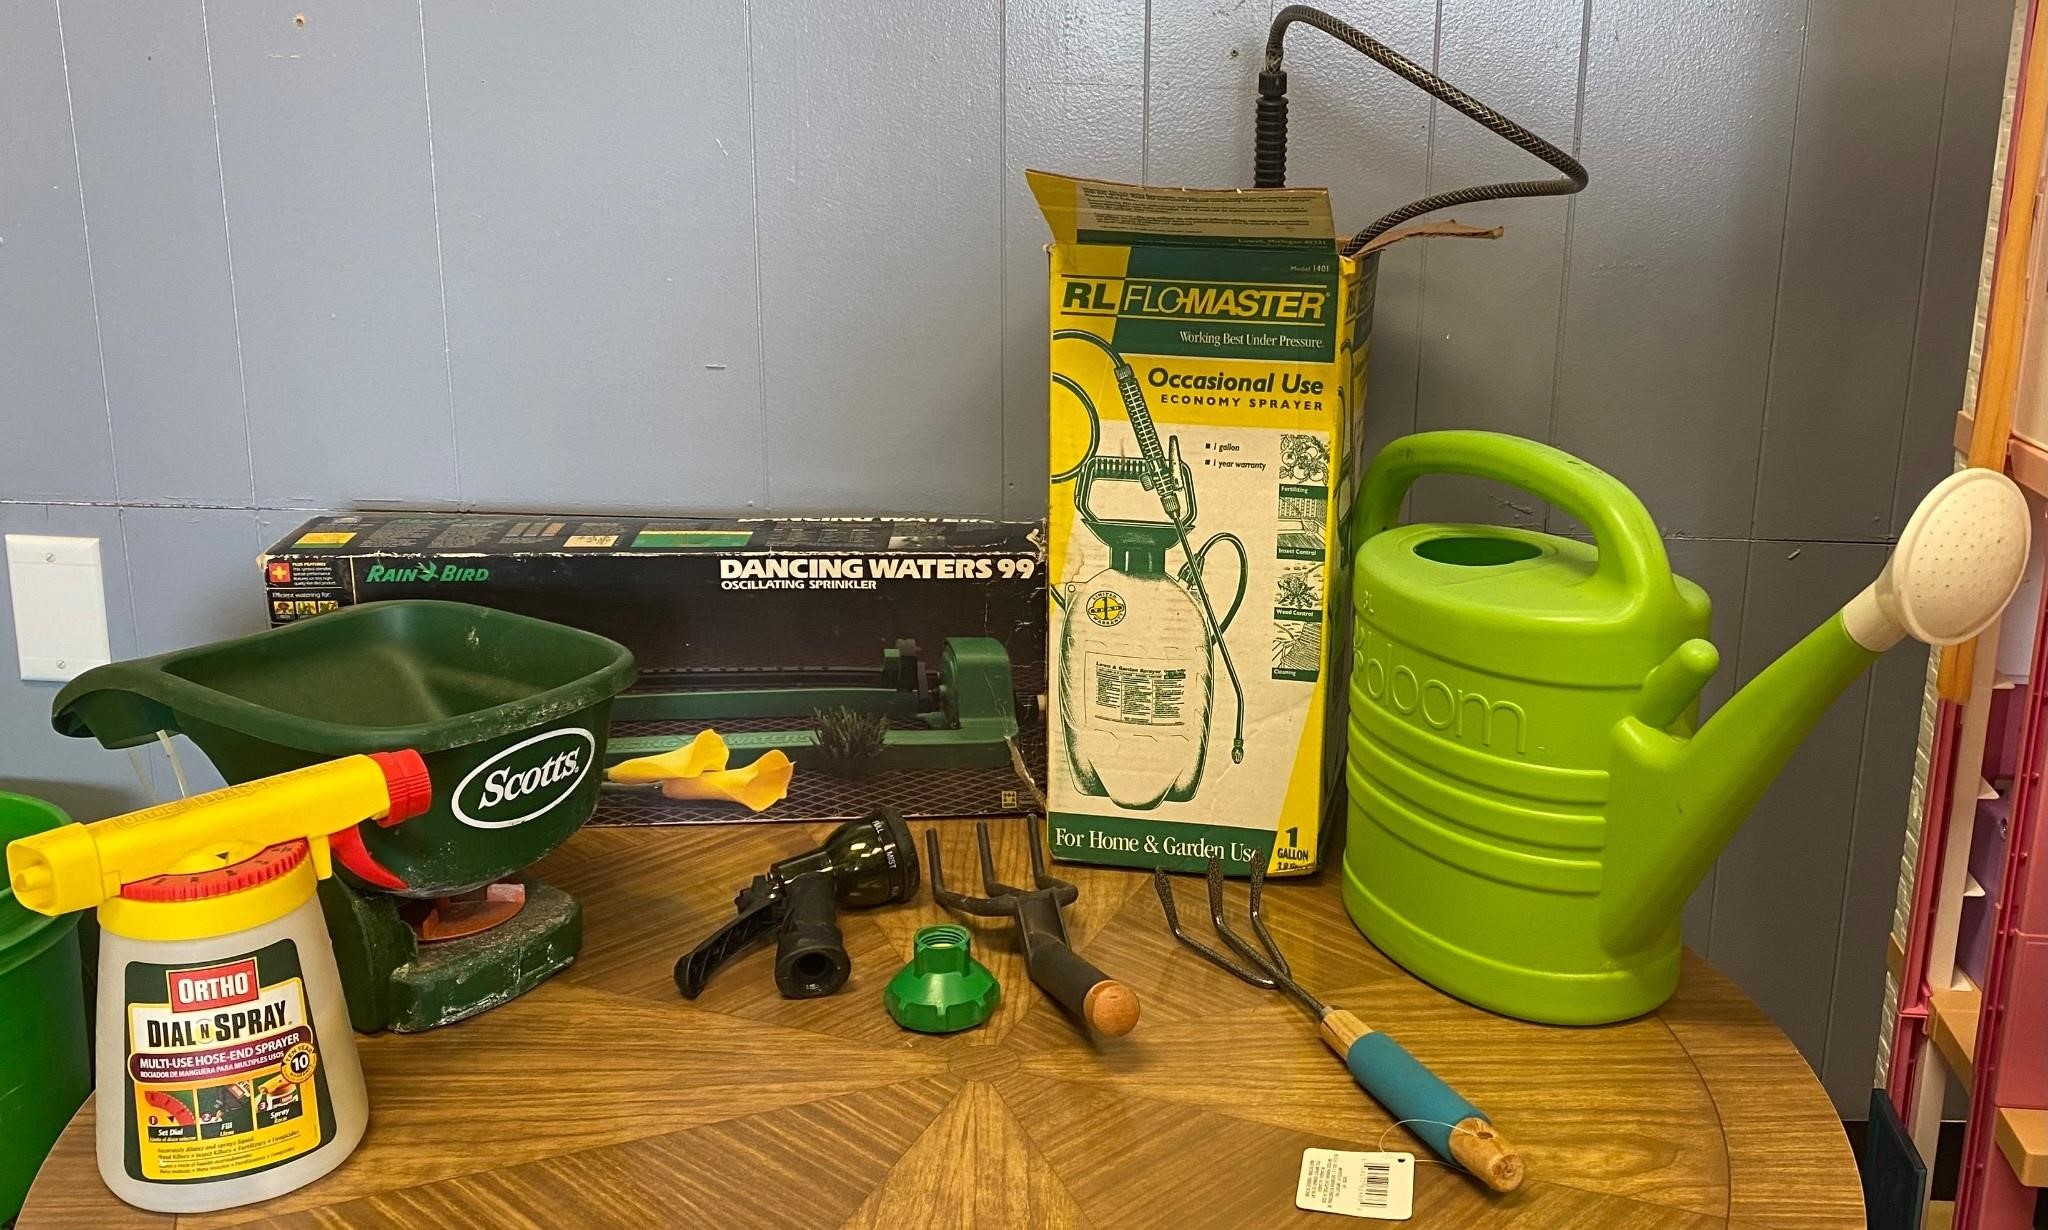 Gardening & Lawn Care Tools/Supplies